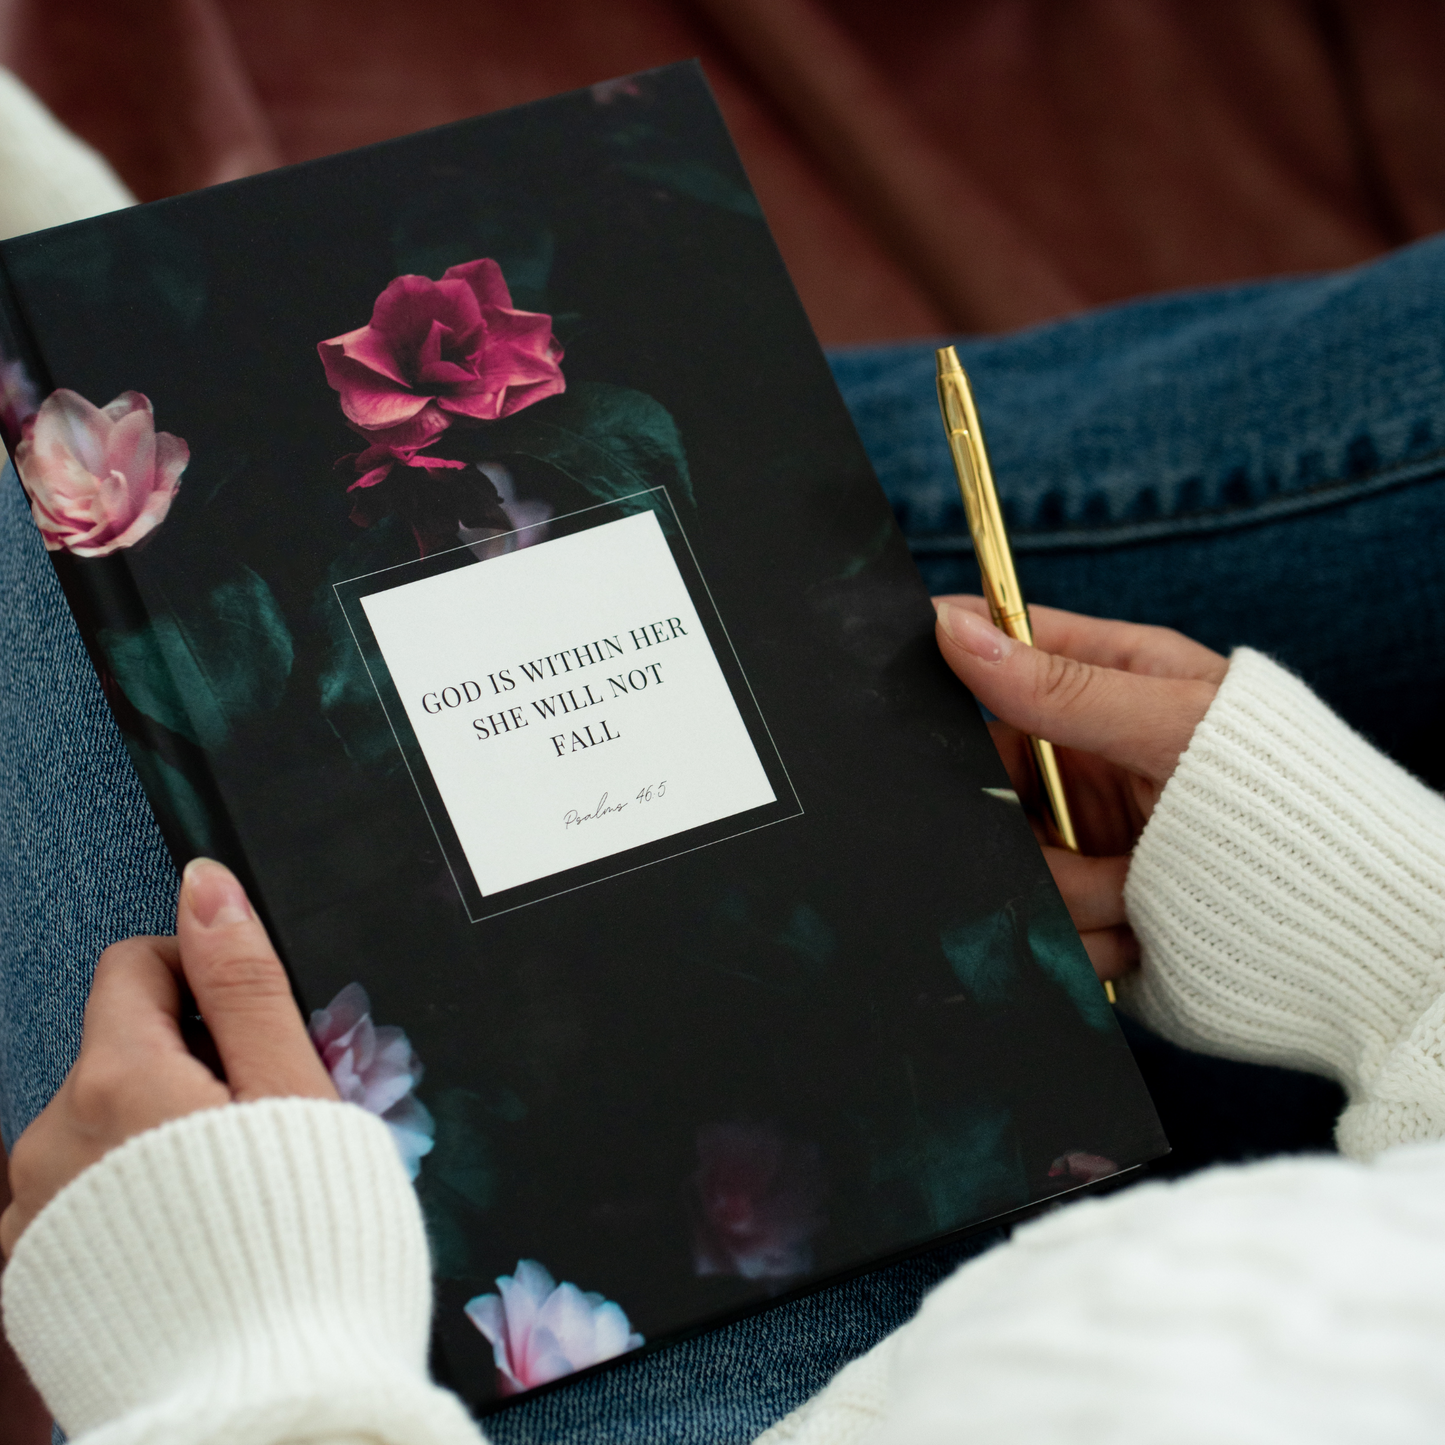 Floral "She Will Not Fall" Application Study Journal